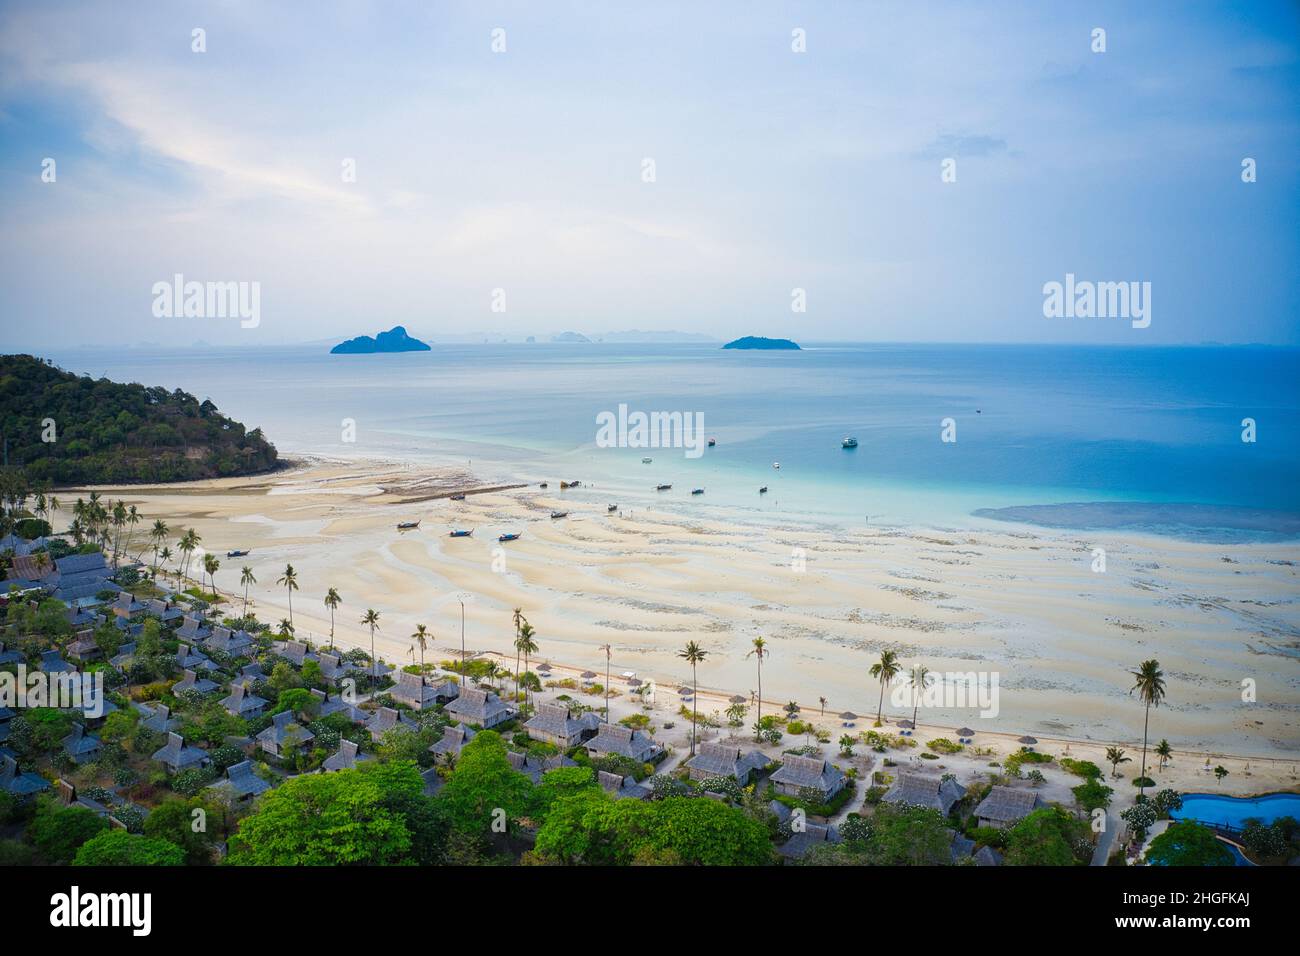 The beautiful idyllic tropical beach of Koh Phi Phi in Thailand photographed with a drone at low tide. Stock Photo